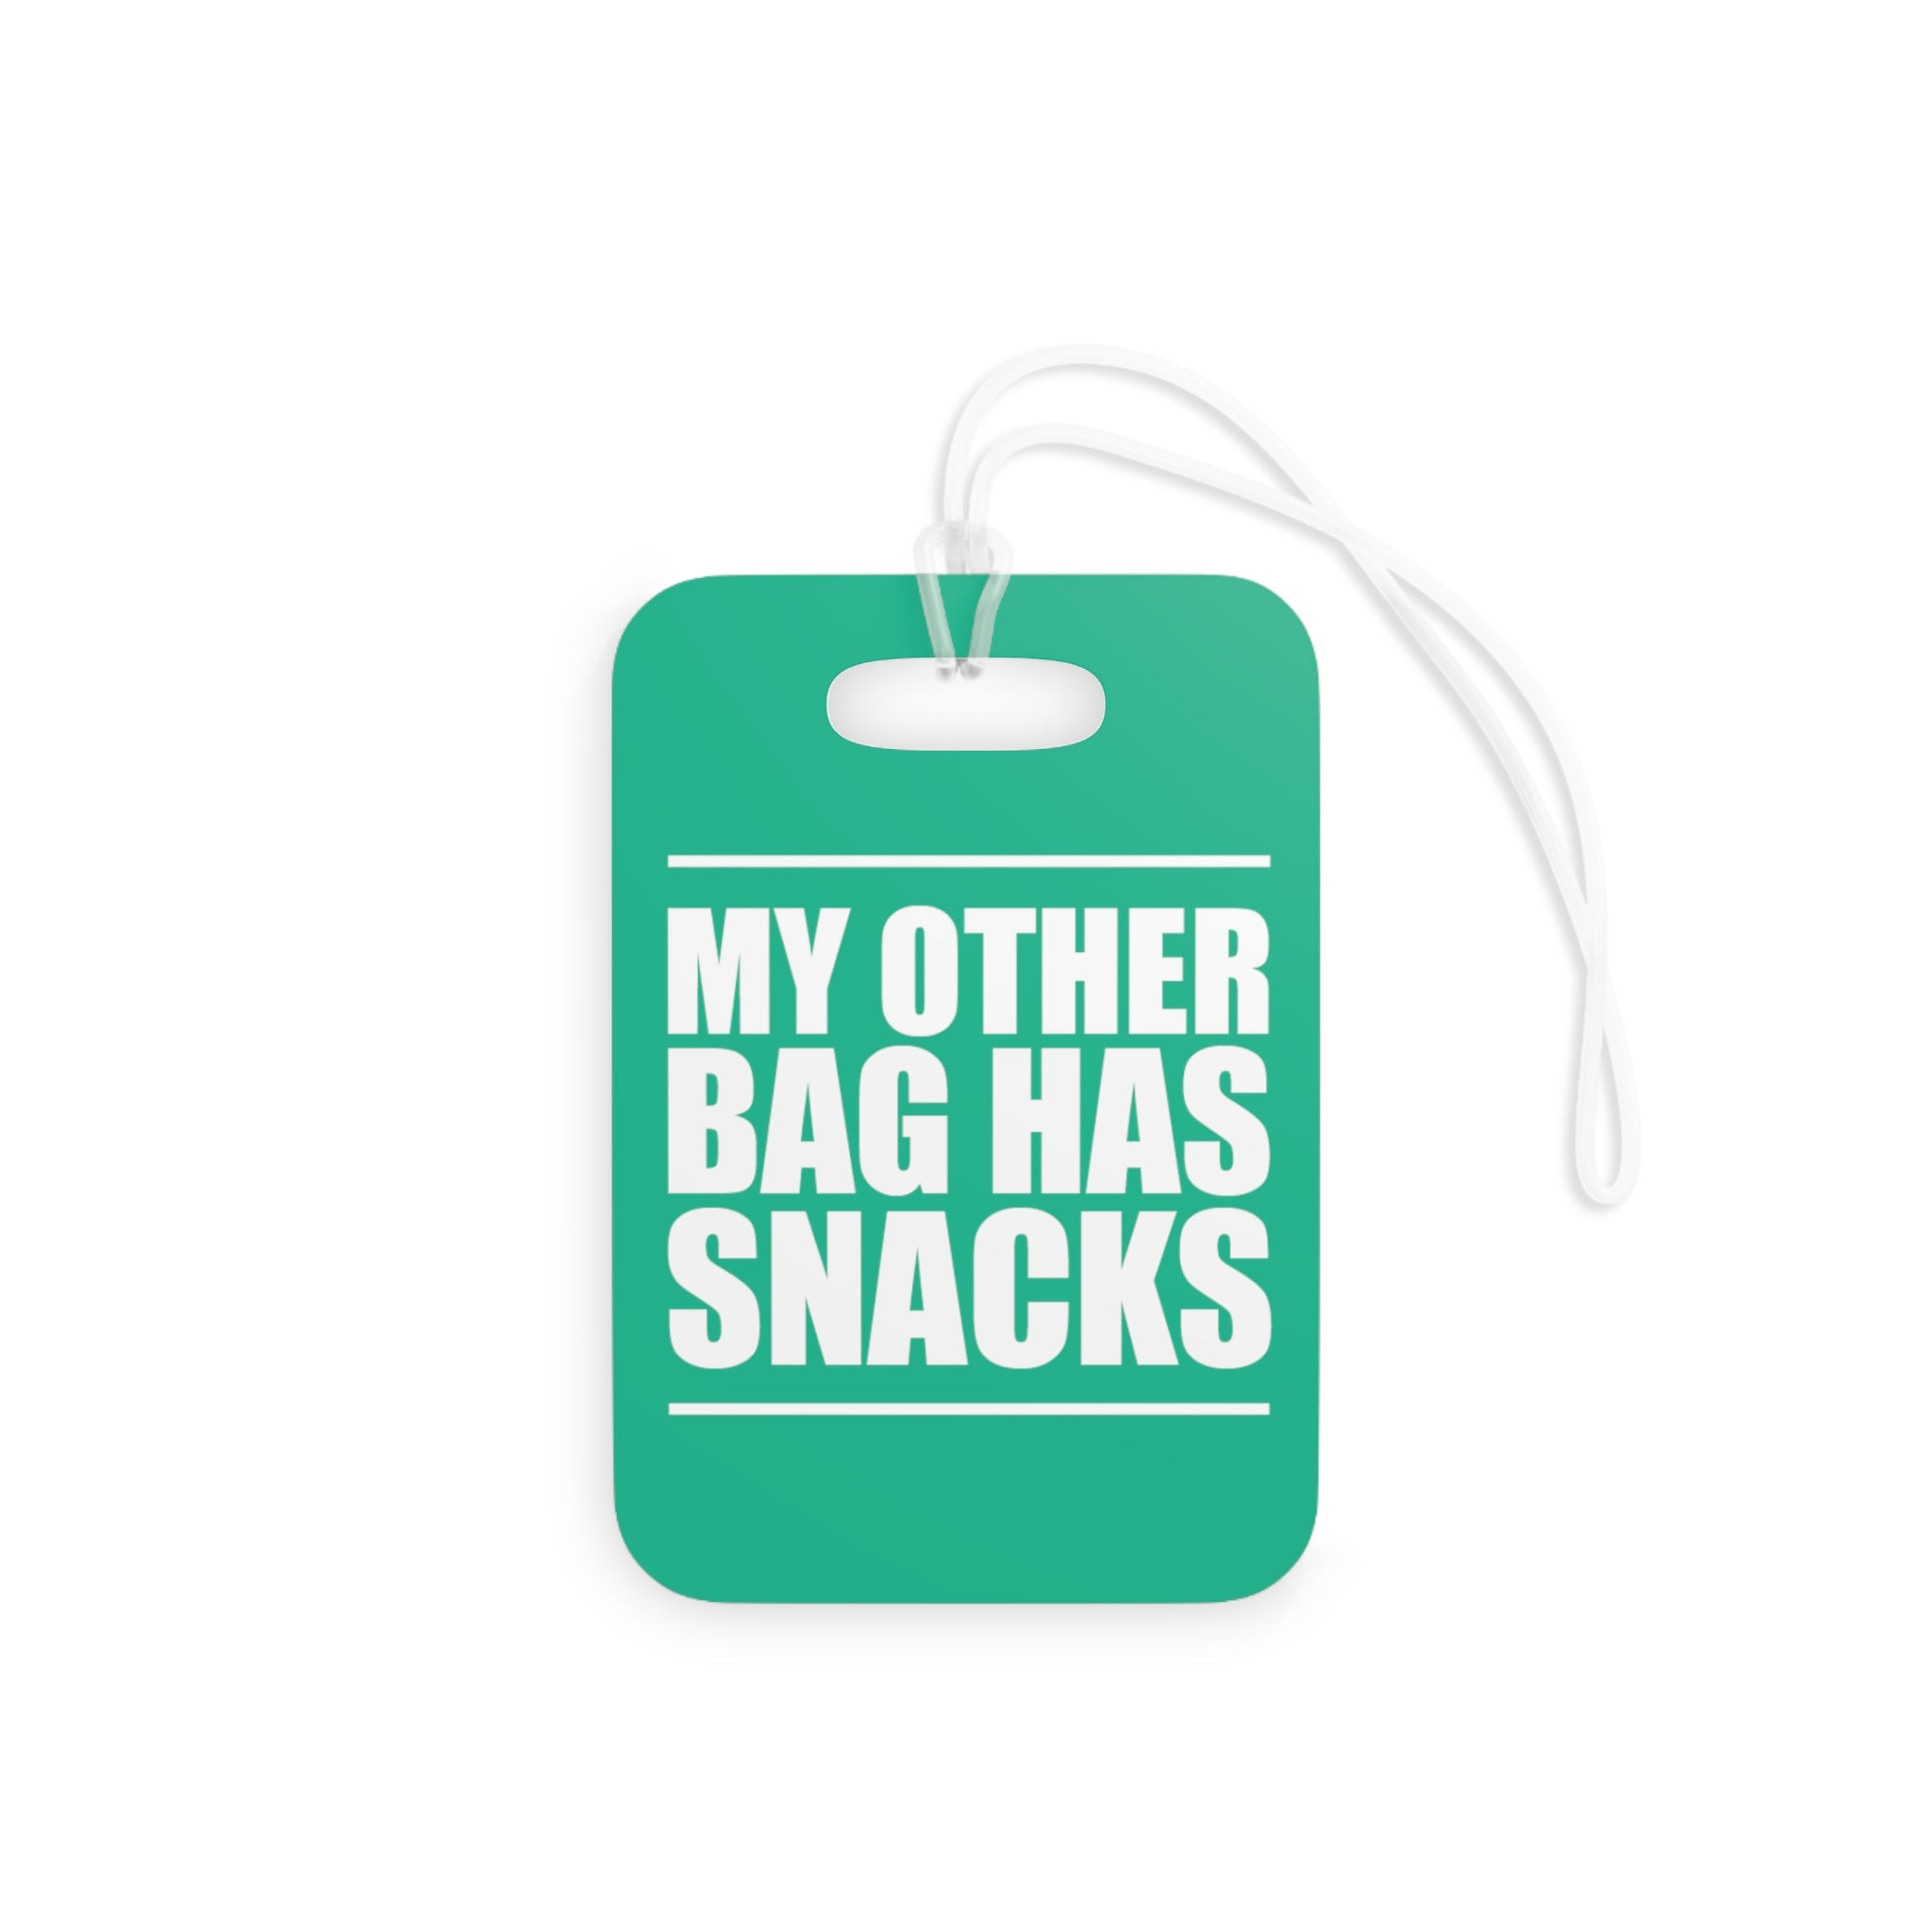 My other bag has snacks Luggage Tag (Green)